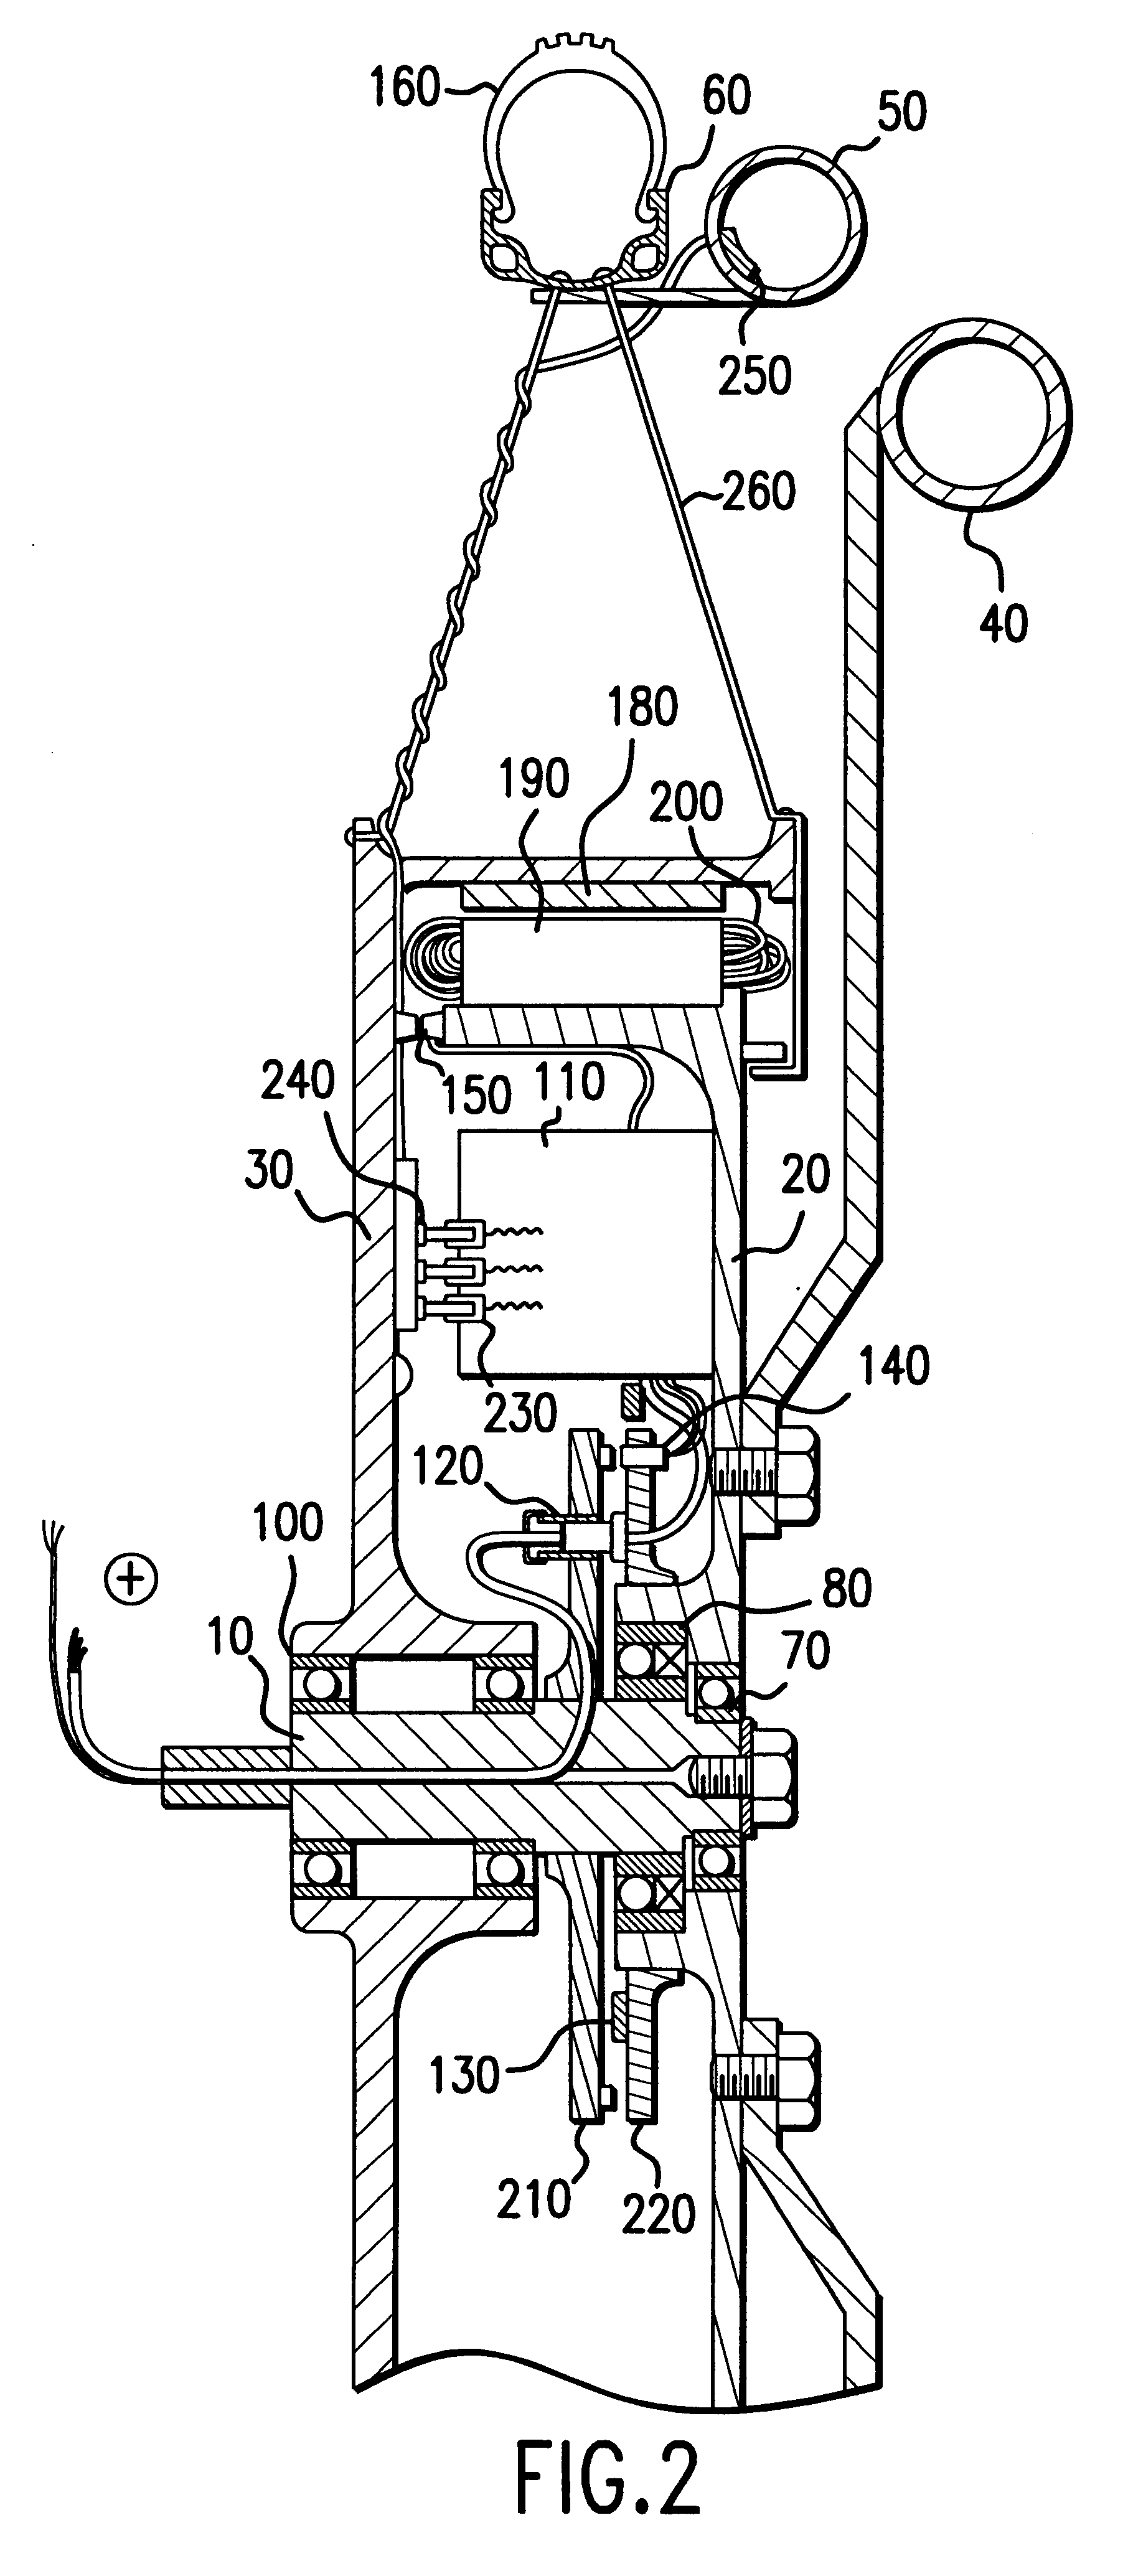 Hybrid drive mechanism for a vehicle driven by muscle power, with an auxiliary electric motor